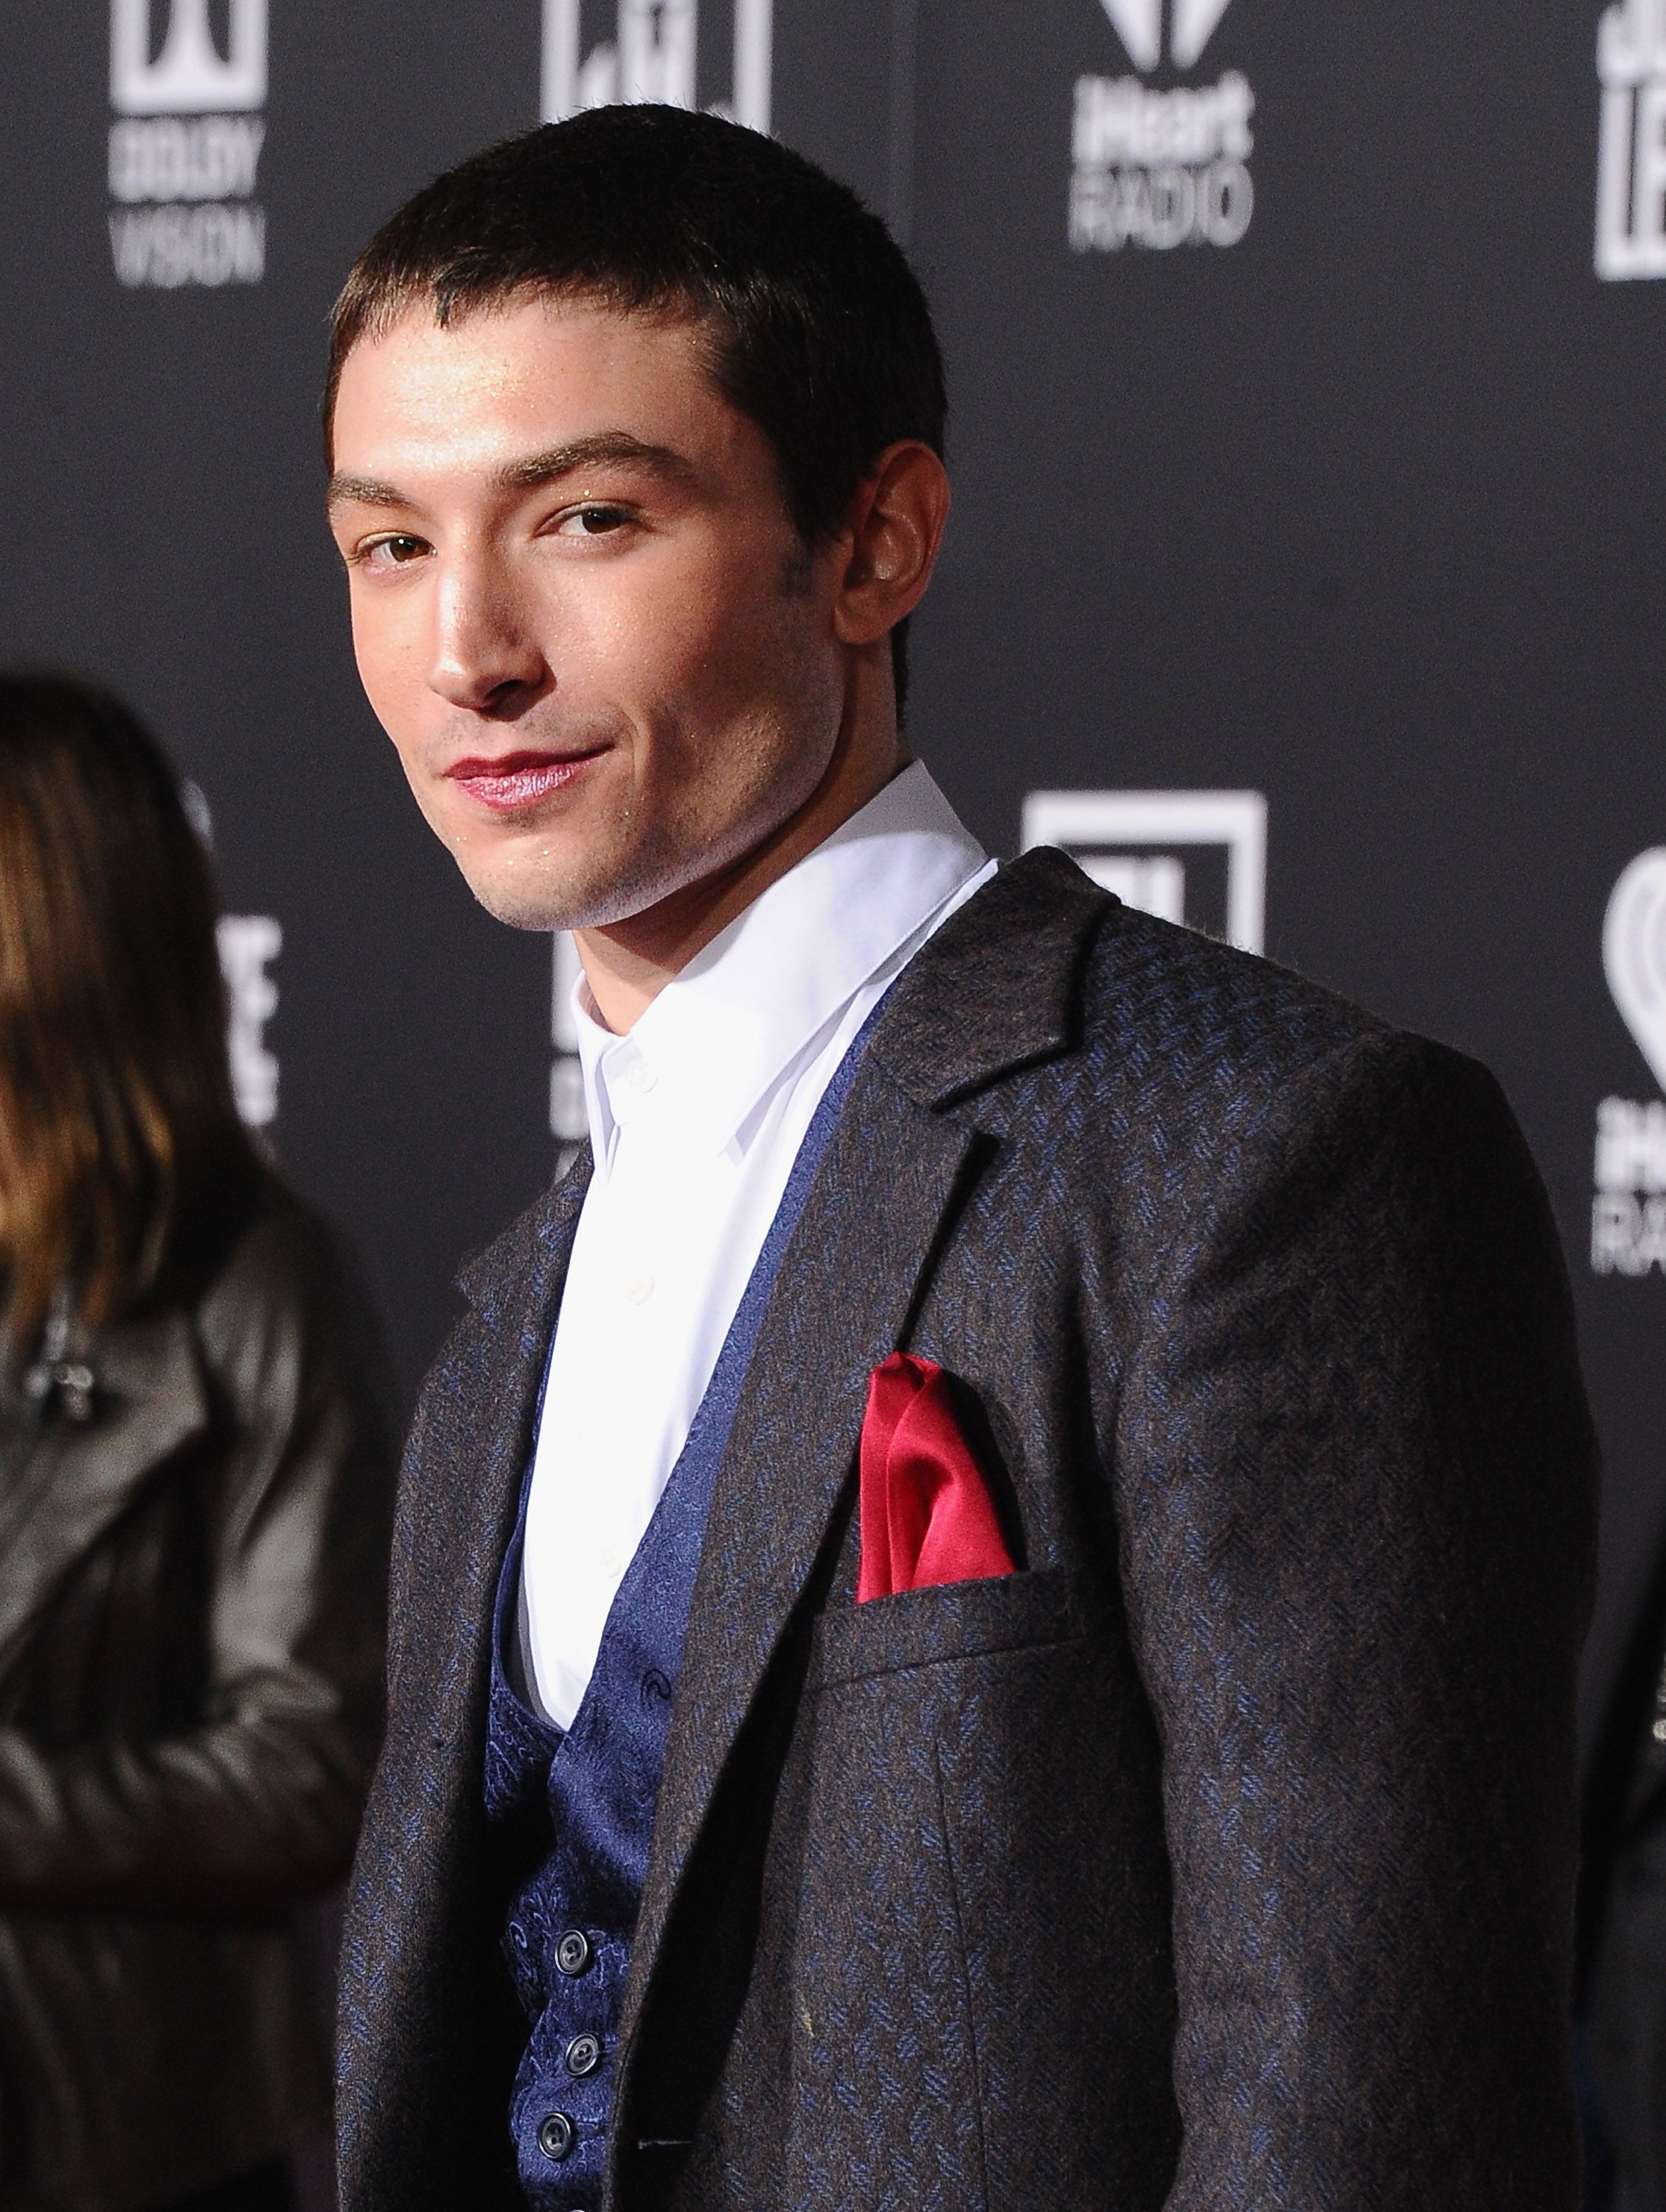 Ezra Miller during the Los Angeles premiere of Warner Bros. Pictures' "Justice League" at Dolby Theatre on November 13, 2017, in Hollywood, California. | Source: Getty Images